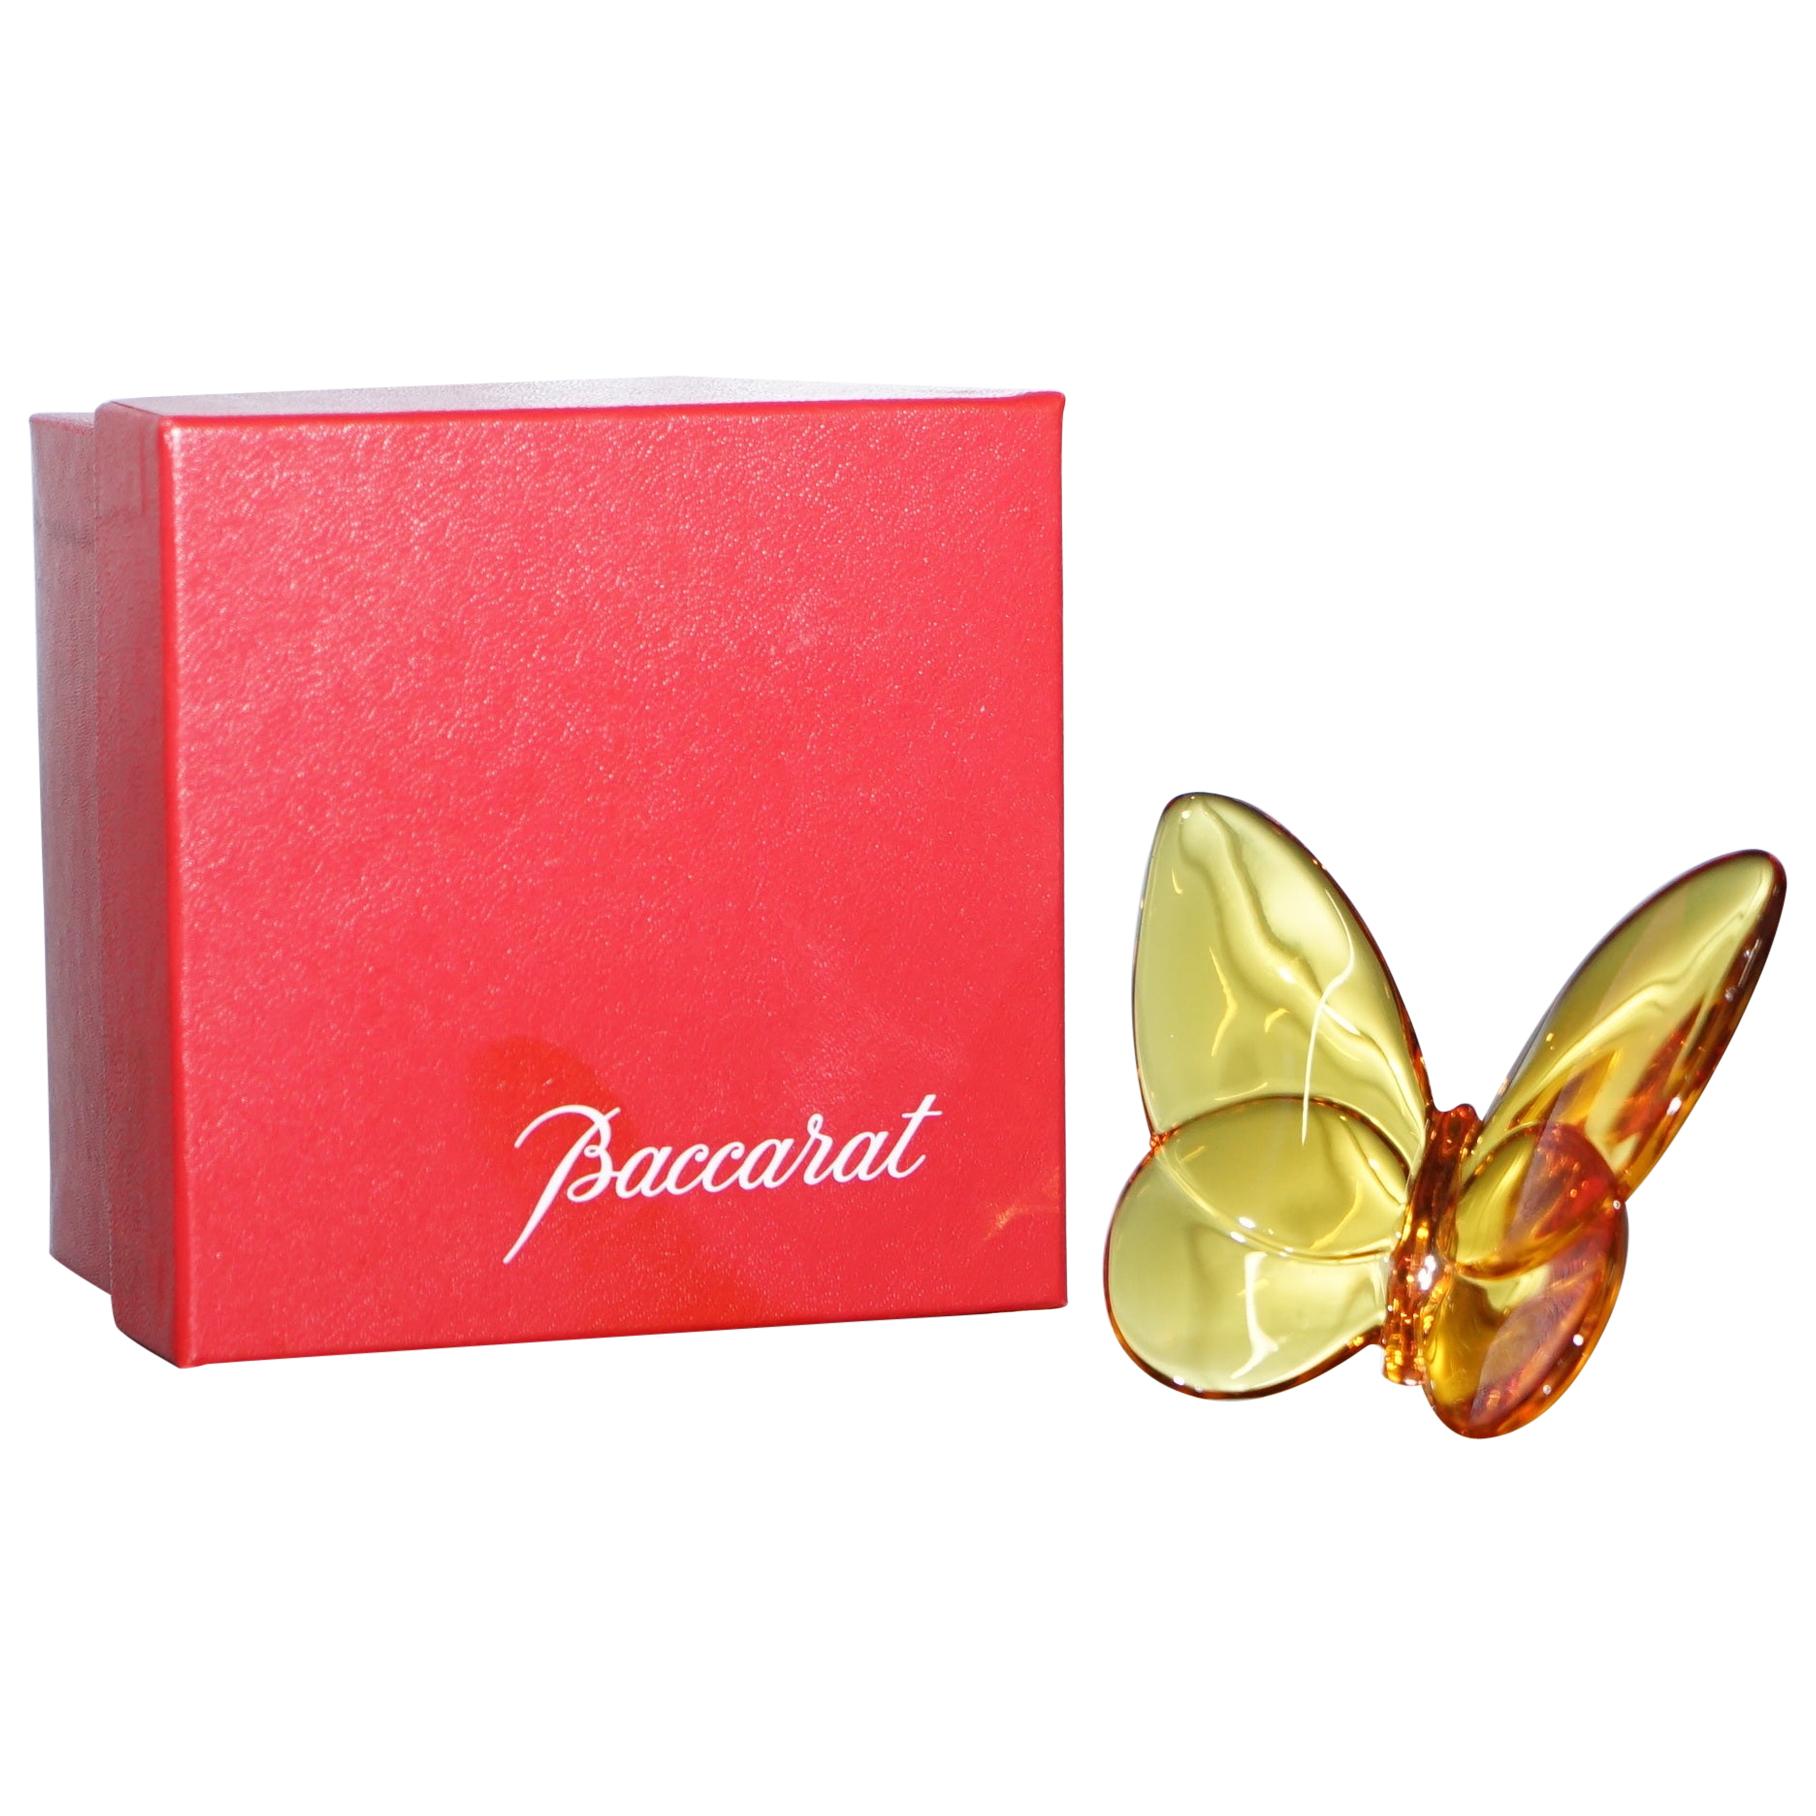 Stunning Brand New Baccarat Crystal Butterfly in Burn Orange Color Boxed